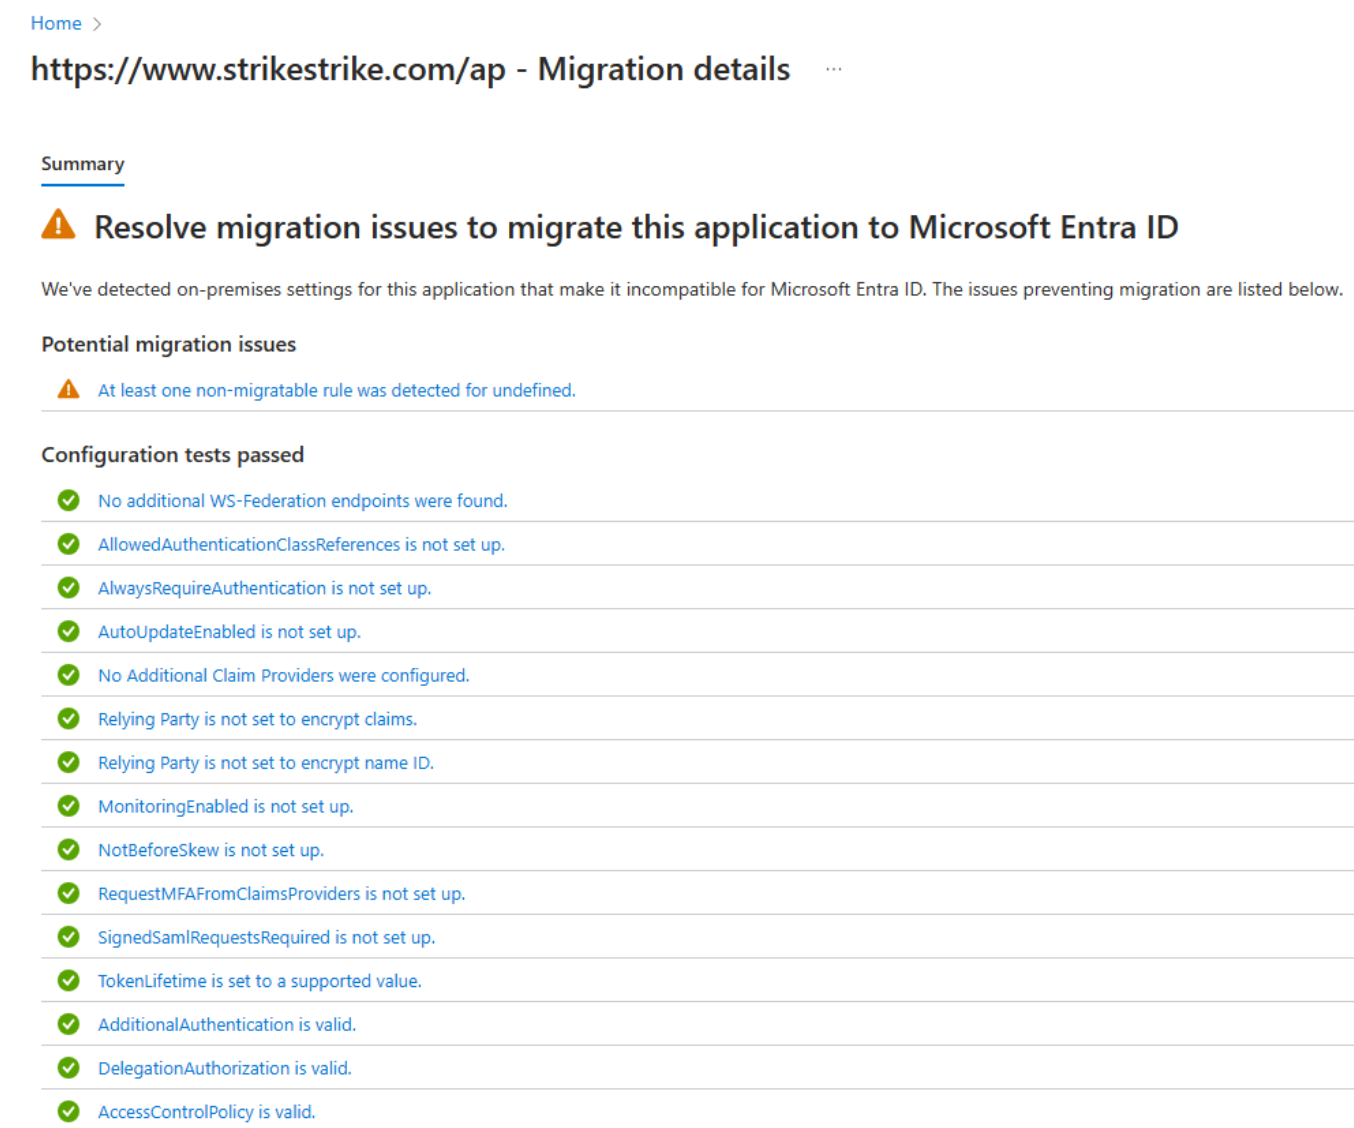 Screenshot of the AD FS application migration details pane.